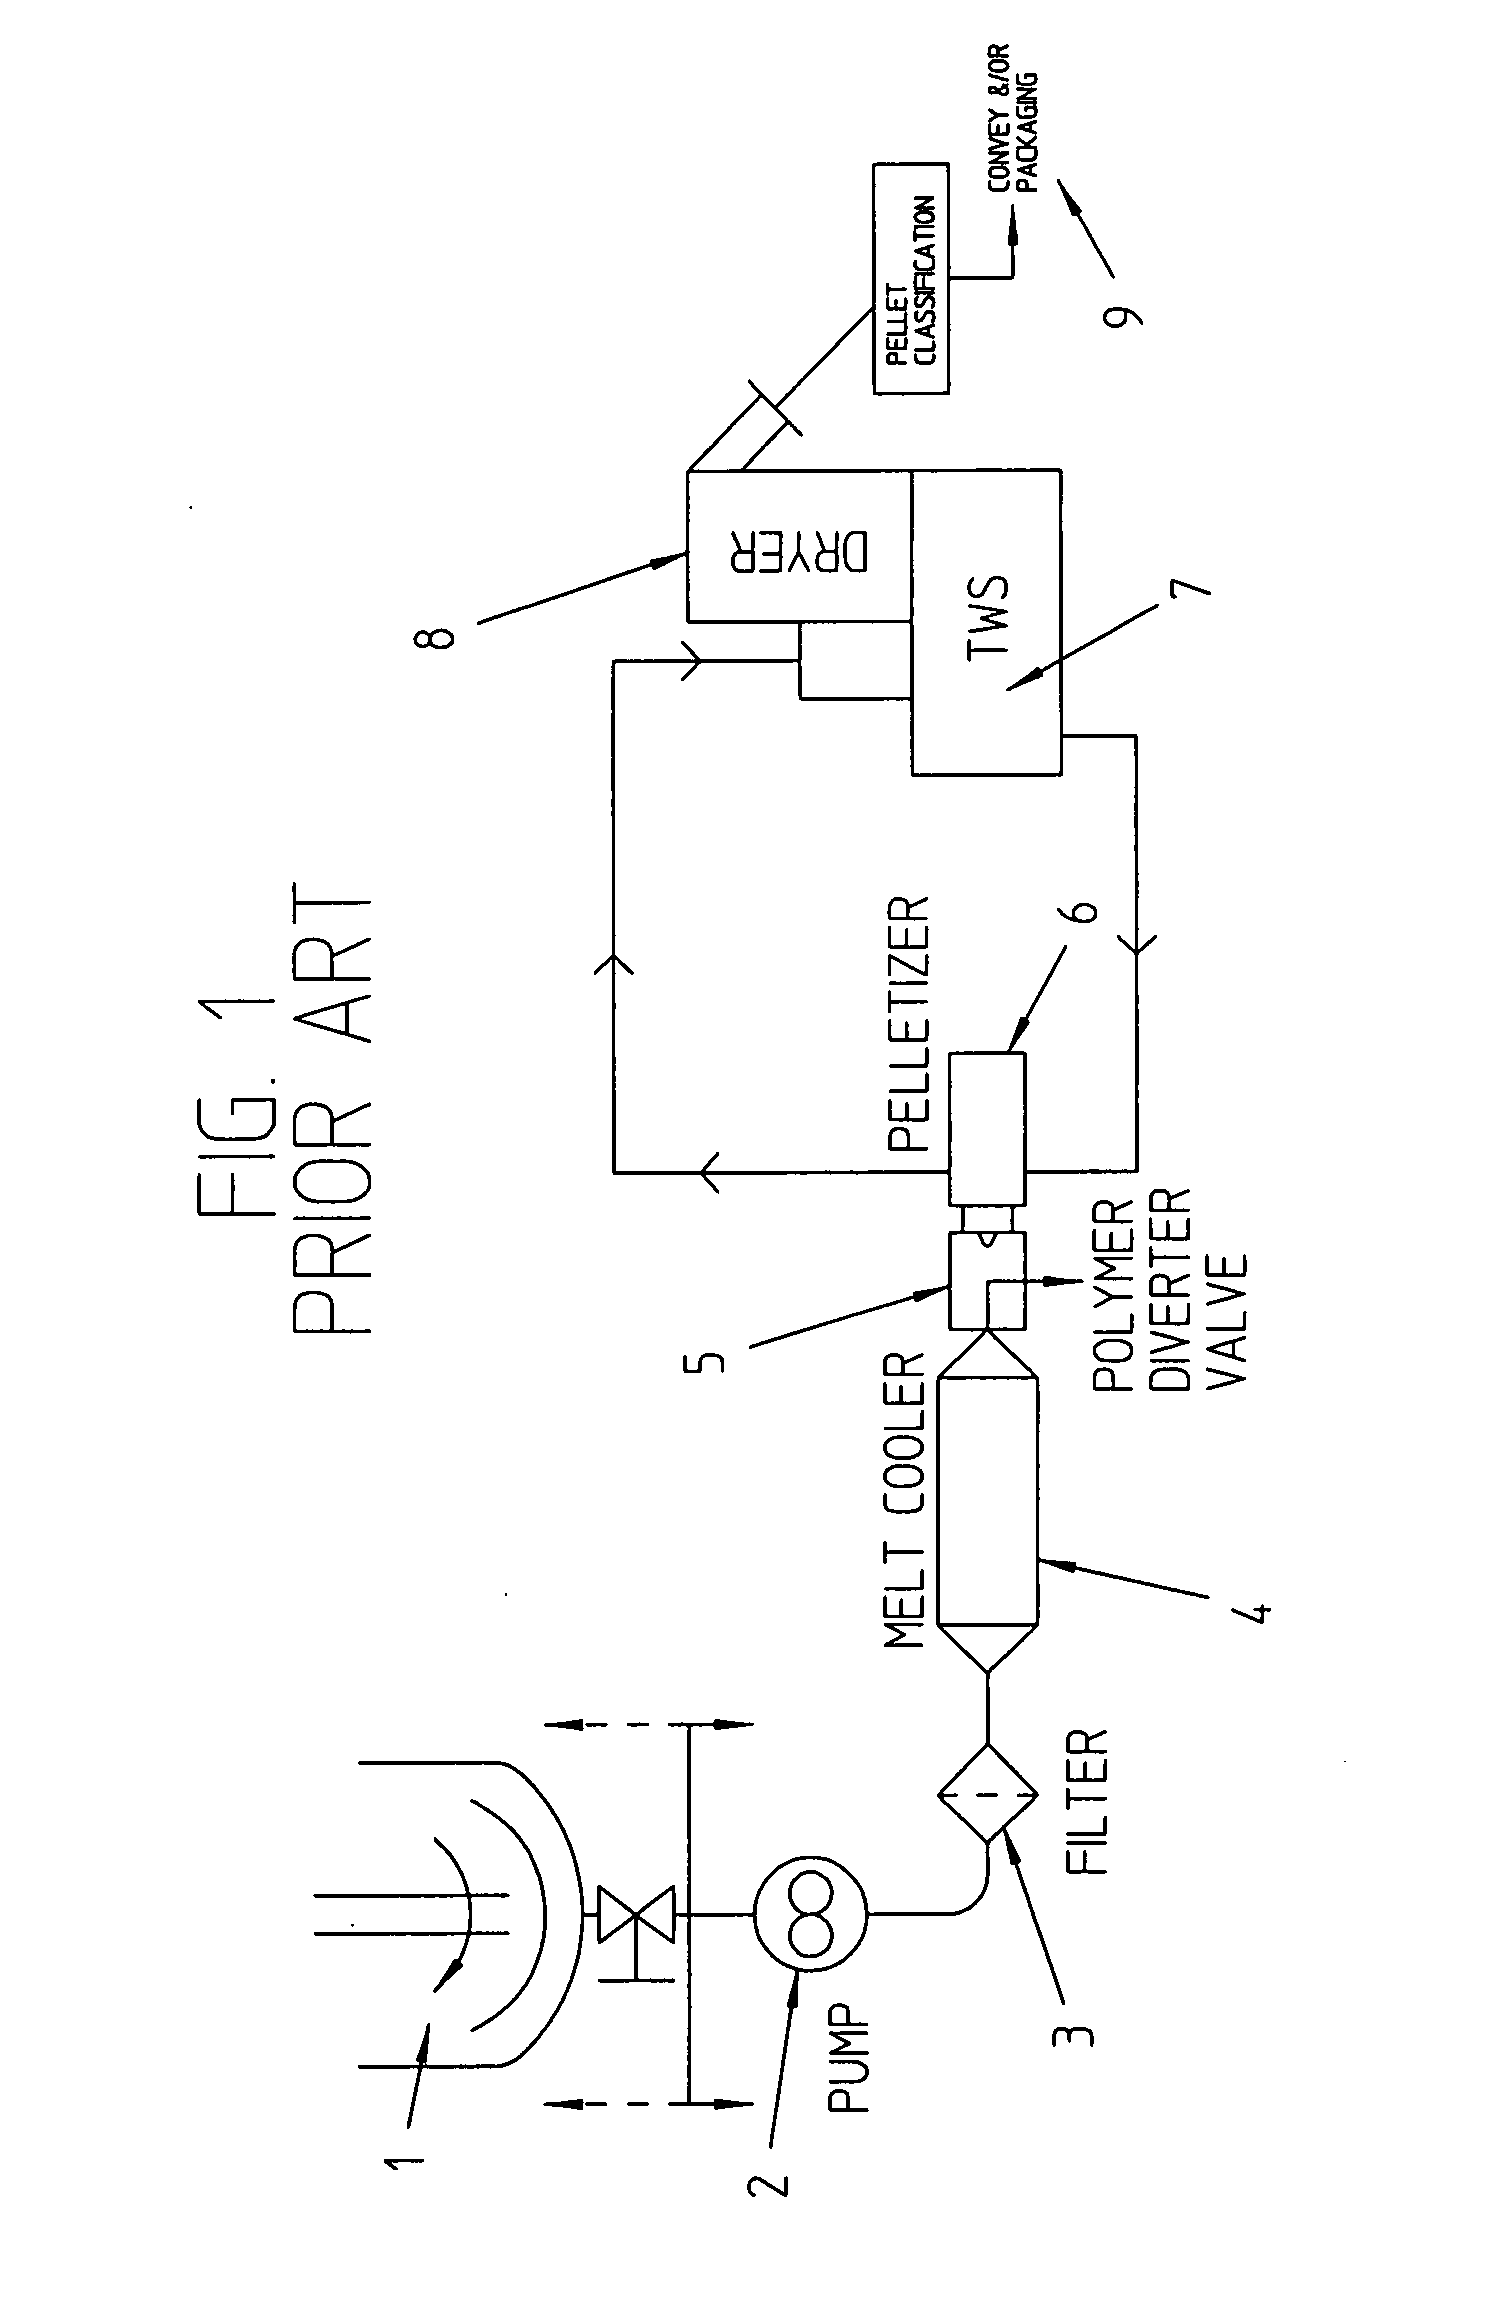 Melt cooler and valving system for an underwater pelletizing process